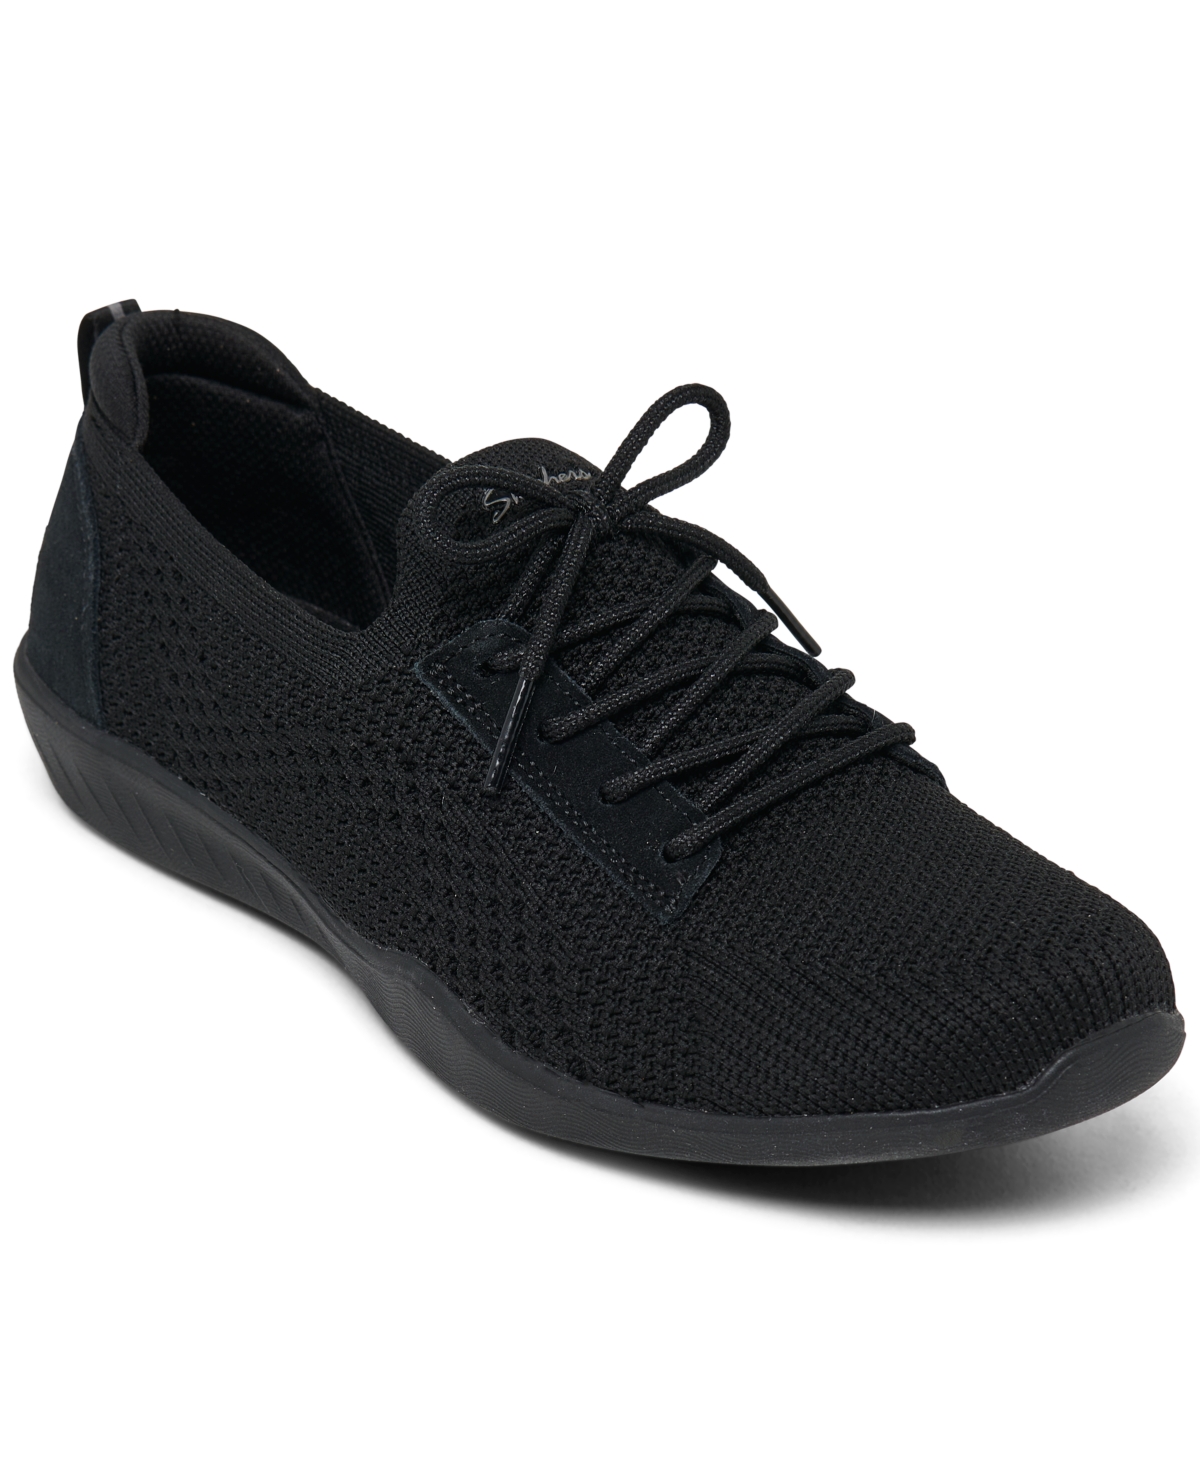 Women's Newbury St - Casually Casual Sneakers from Finish Line - Black